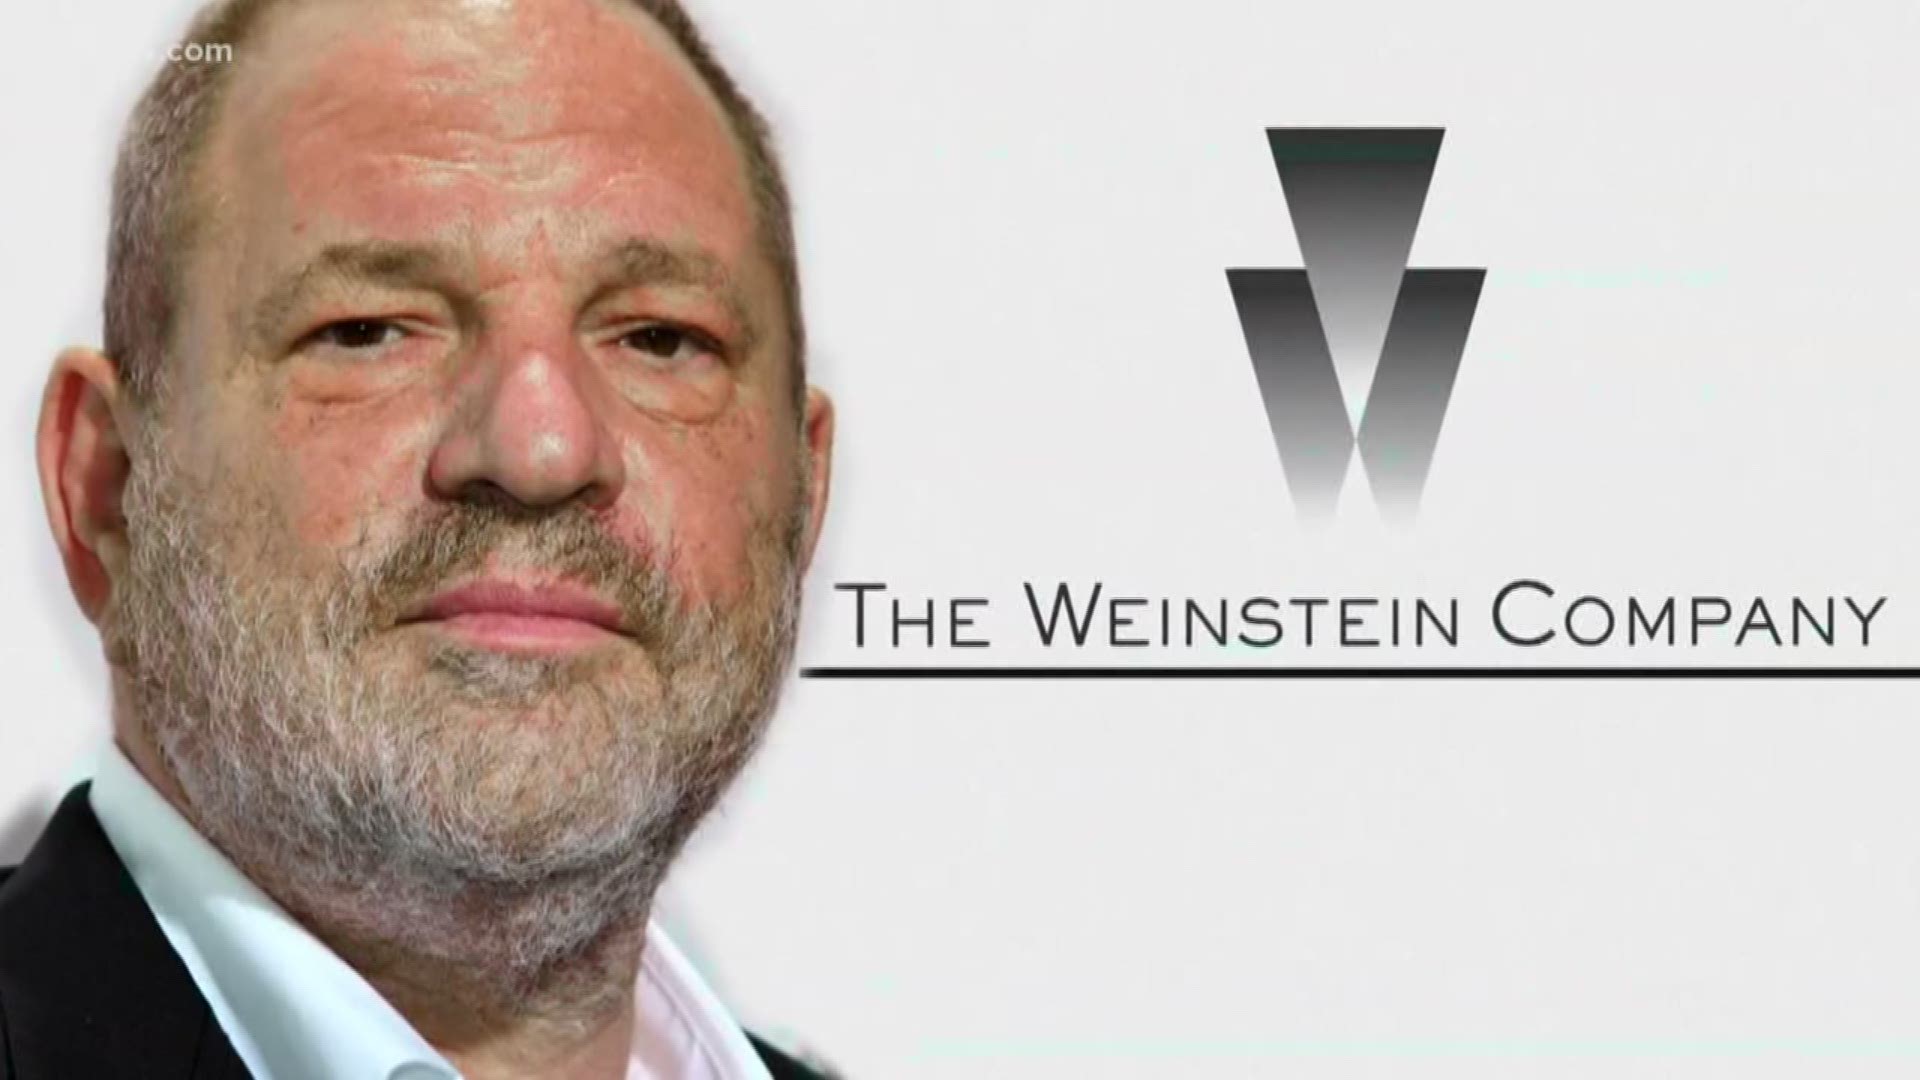 Harvey Weinstein is seeing treatment for sex addiction, but his behavior isn't necessarily that of an addict.